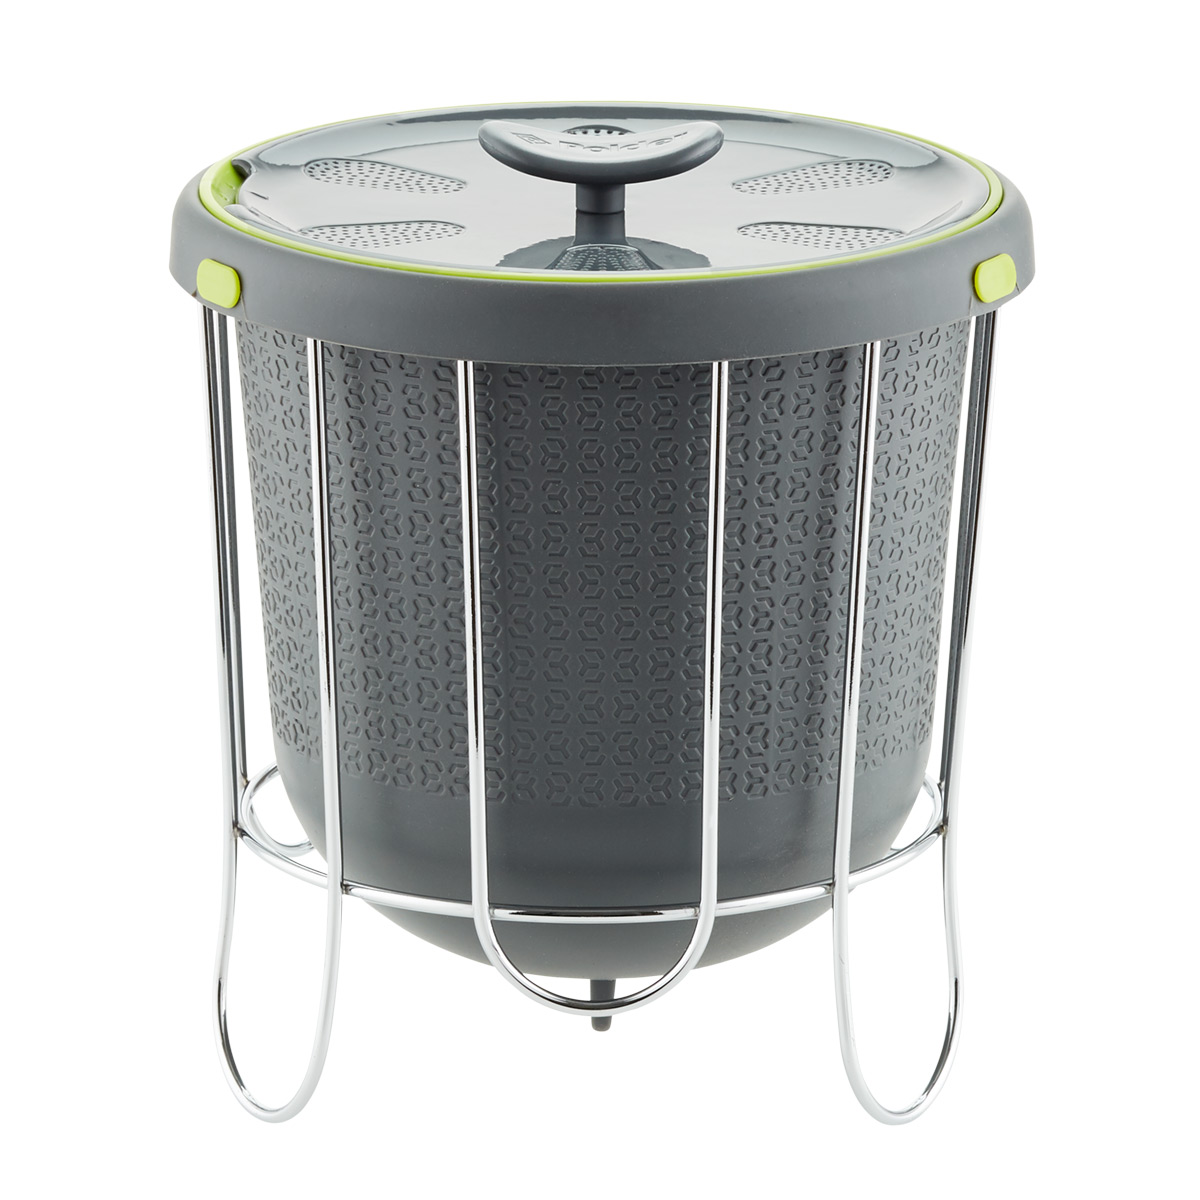 https://www.containerstore.com/catalogimages/342456/10074457-kitchen-composter-1gal.jpg